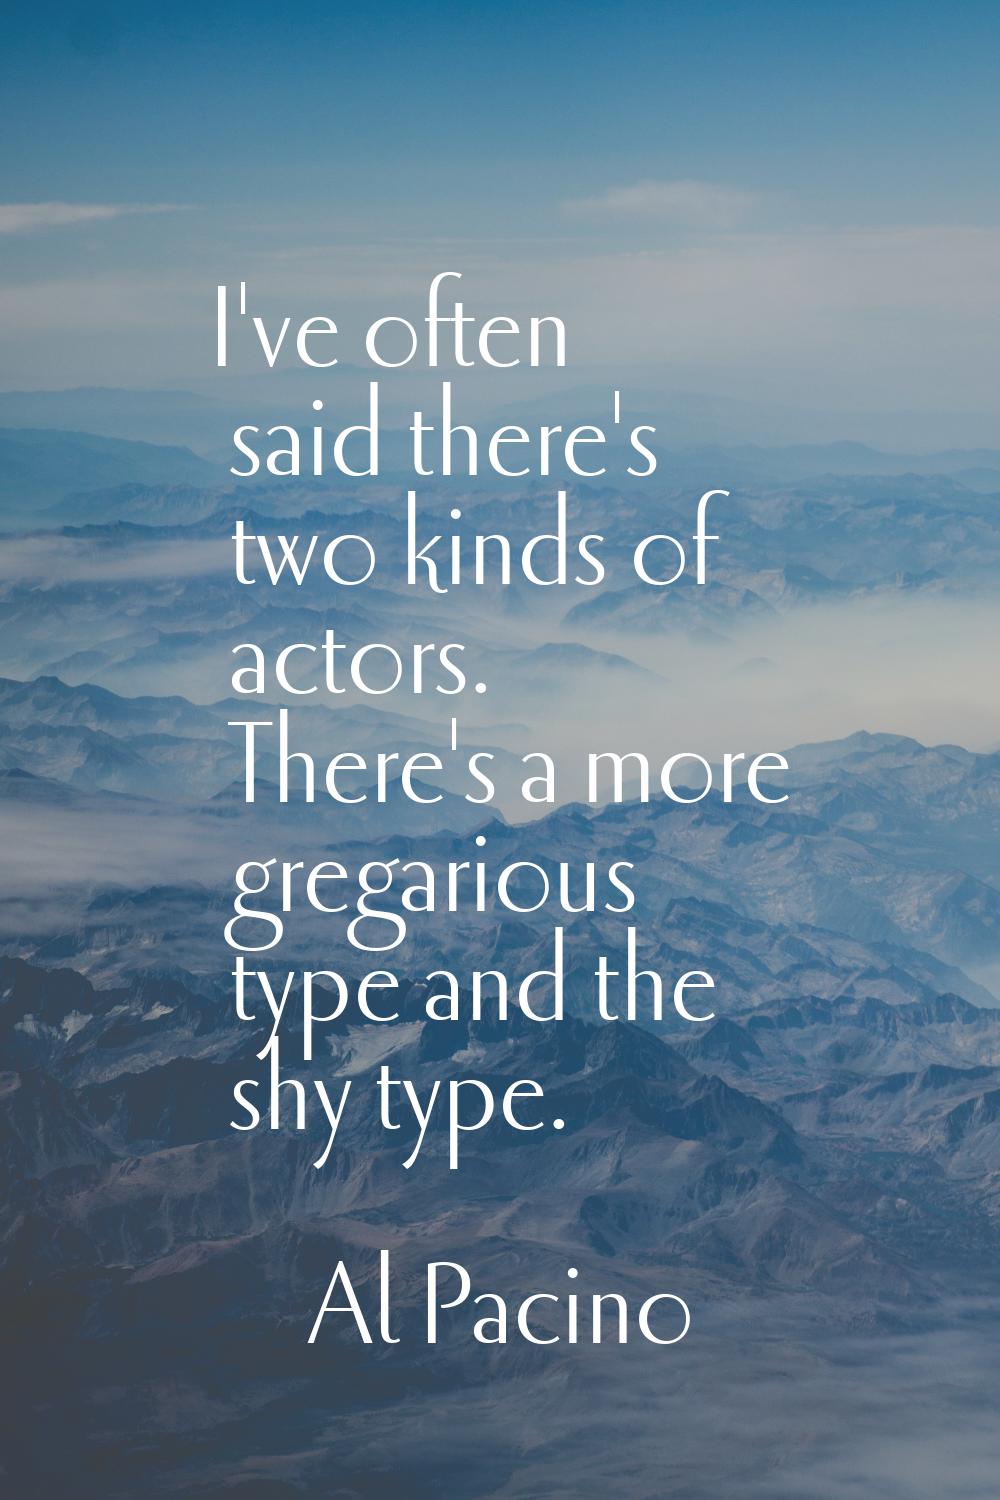 I've often said there's two kinds of actors. There's a more gregarious type and the shy type.